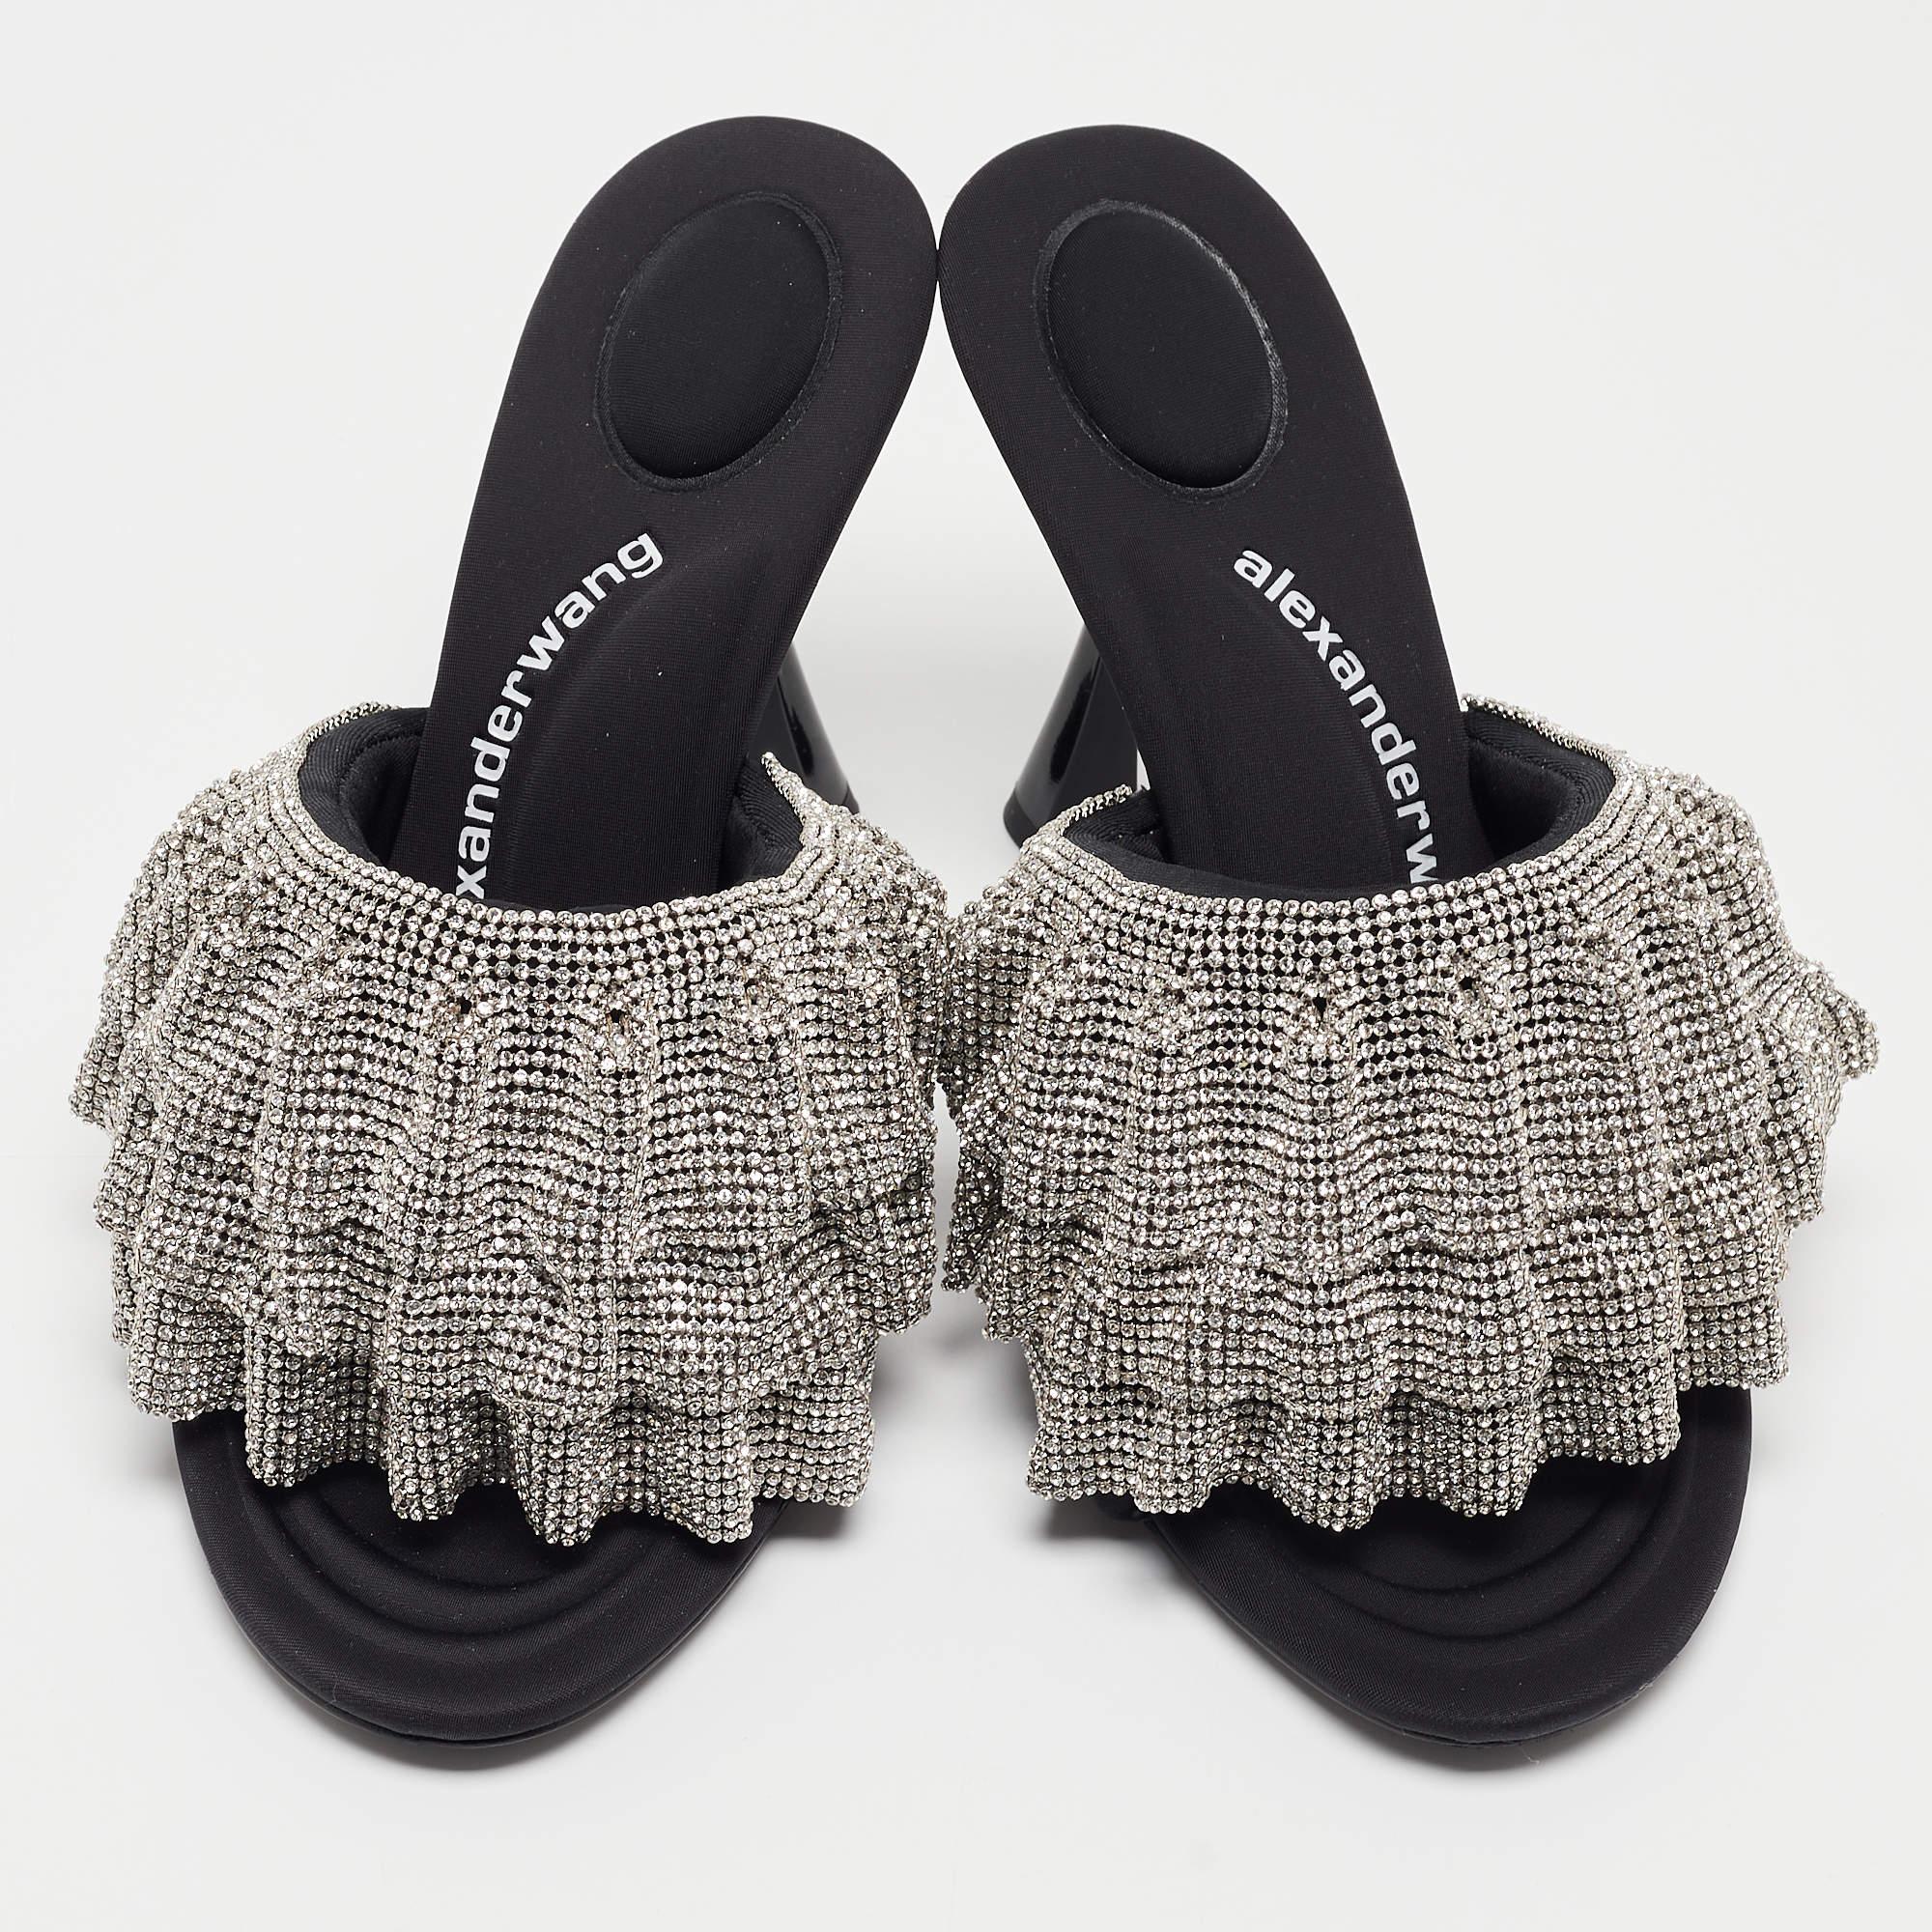 Deliver statement looks with these mules from Alexander Wang! From their shape and detailing to their overall appeal, they exude elegance.

Includes: Original Box, Extra Heel Tips, Extra Embellishments

